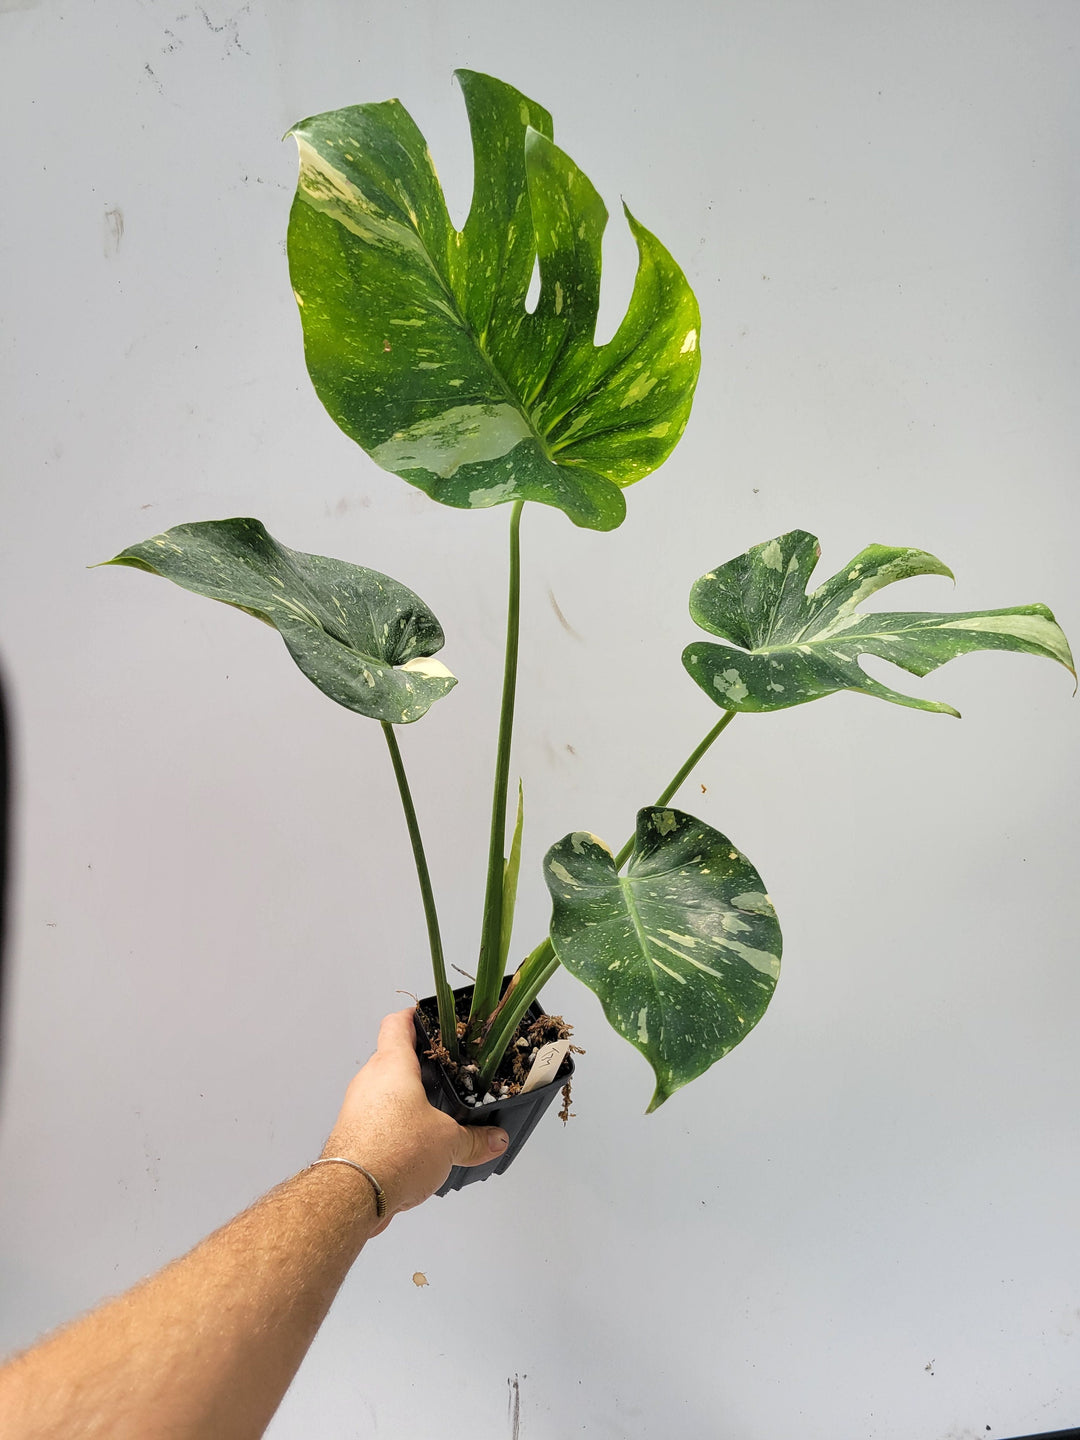 Monstera Thai Constellation,  XL size,  Highly variegated, Japanese Cultivar, exact plant pictured  US Seller #t37